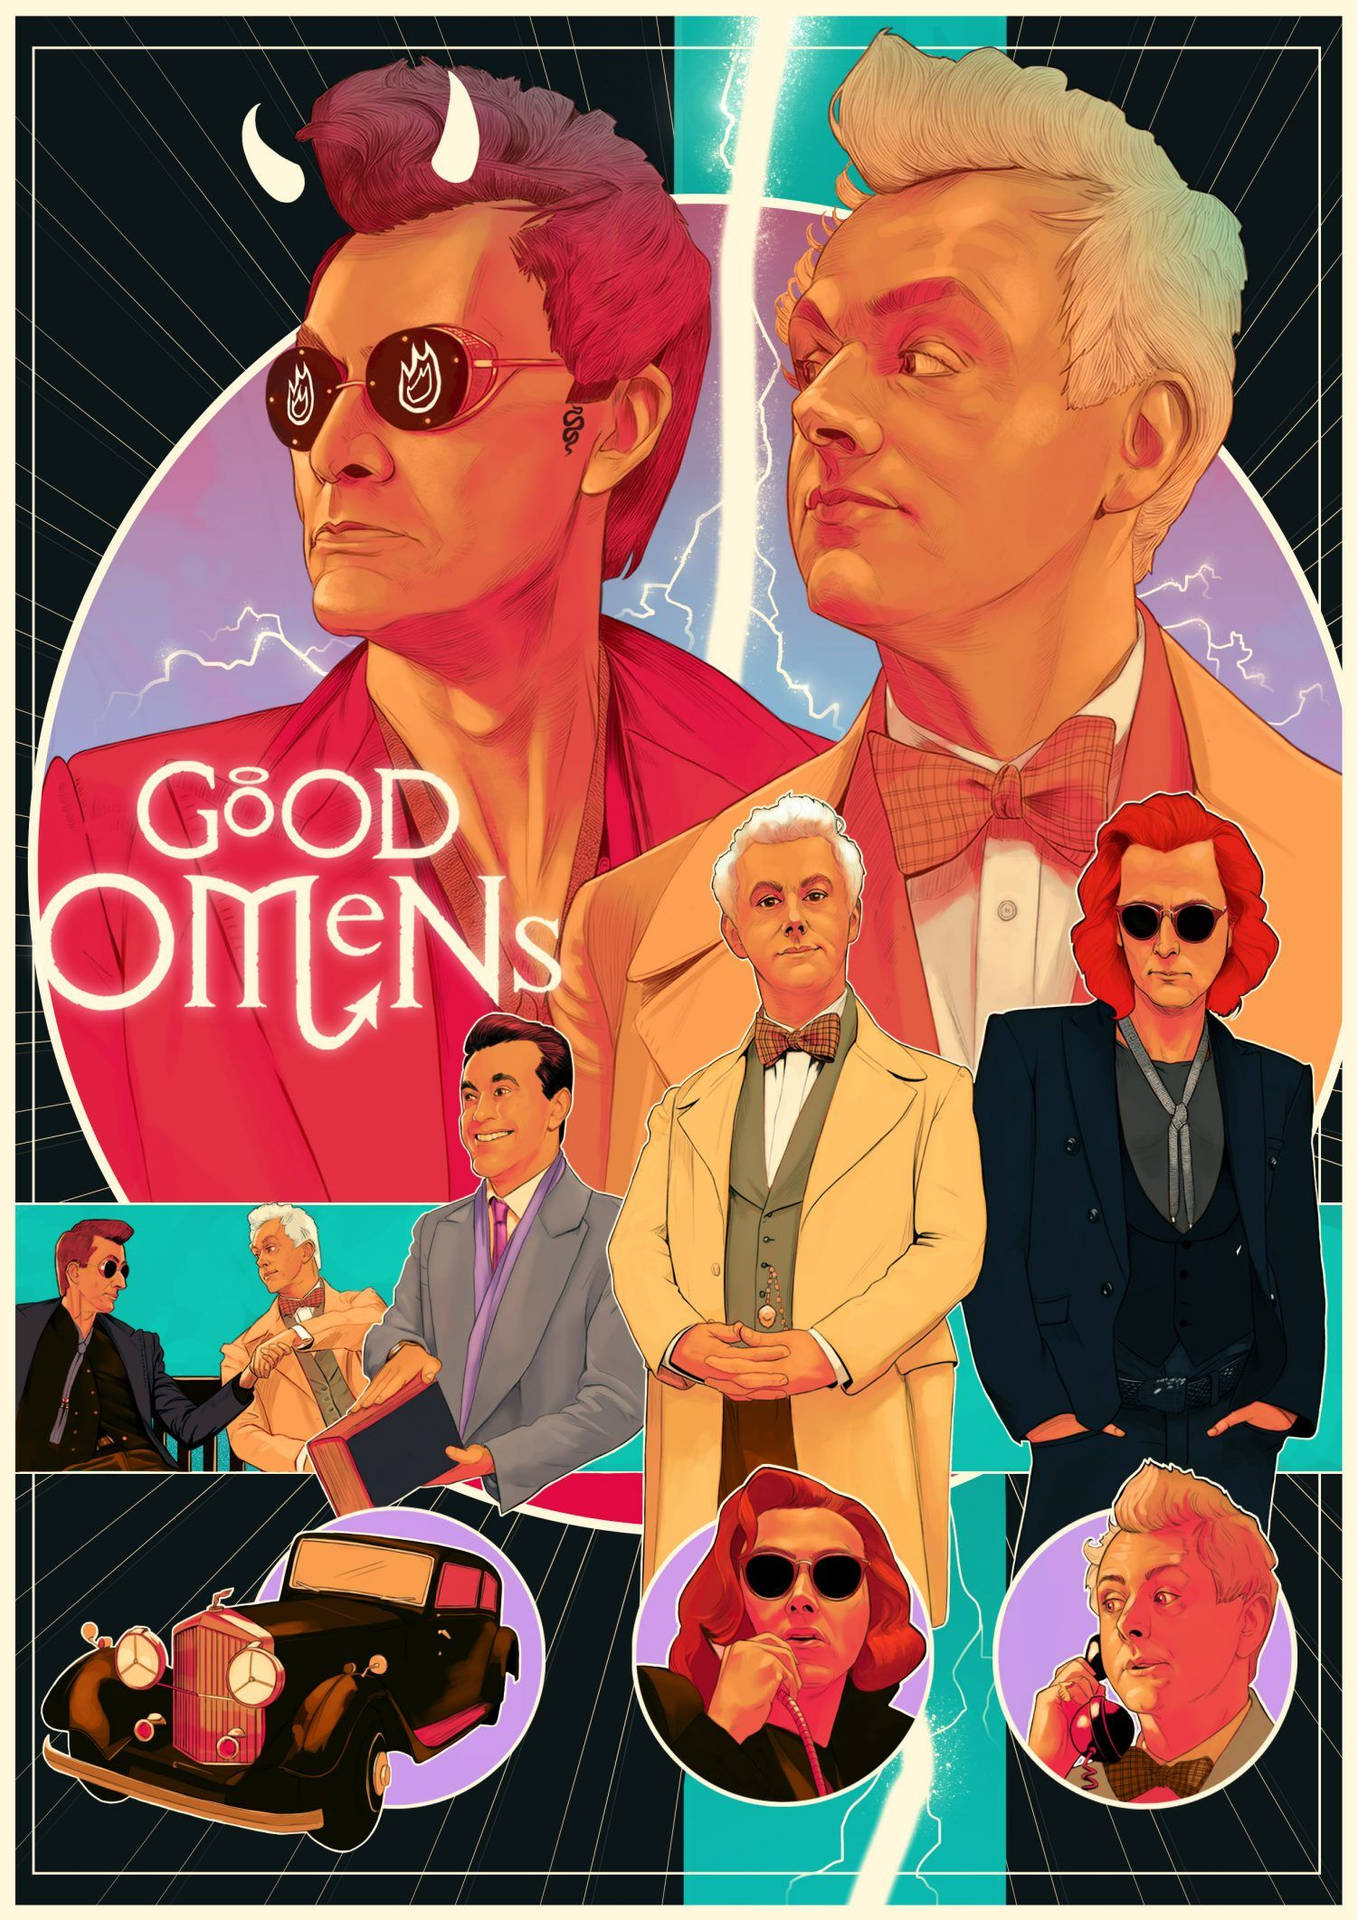 Good Omens Creative Poster Background